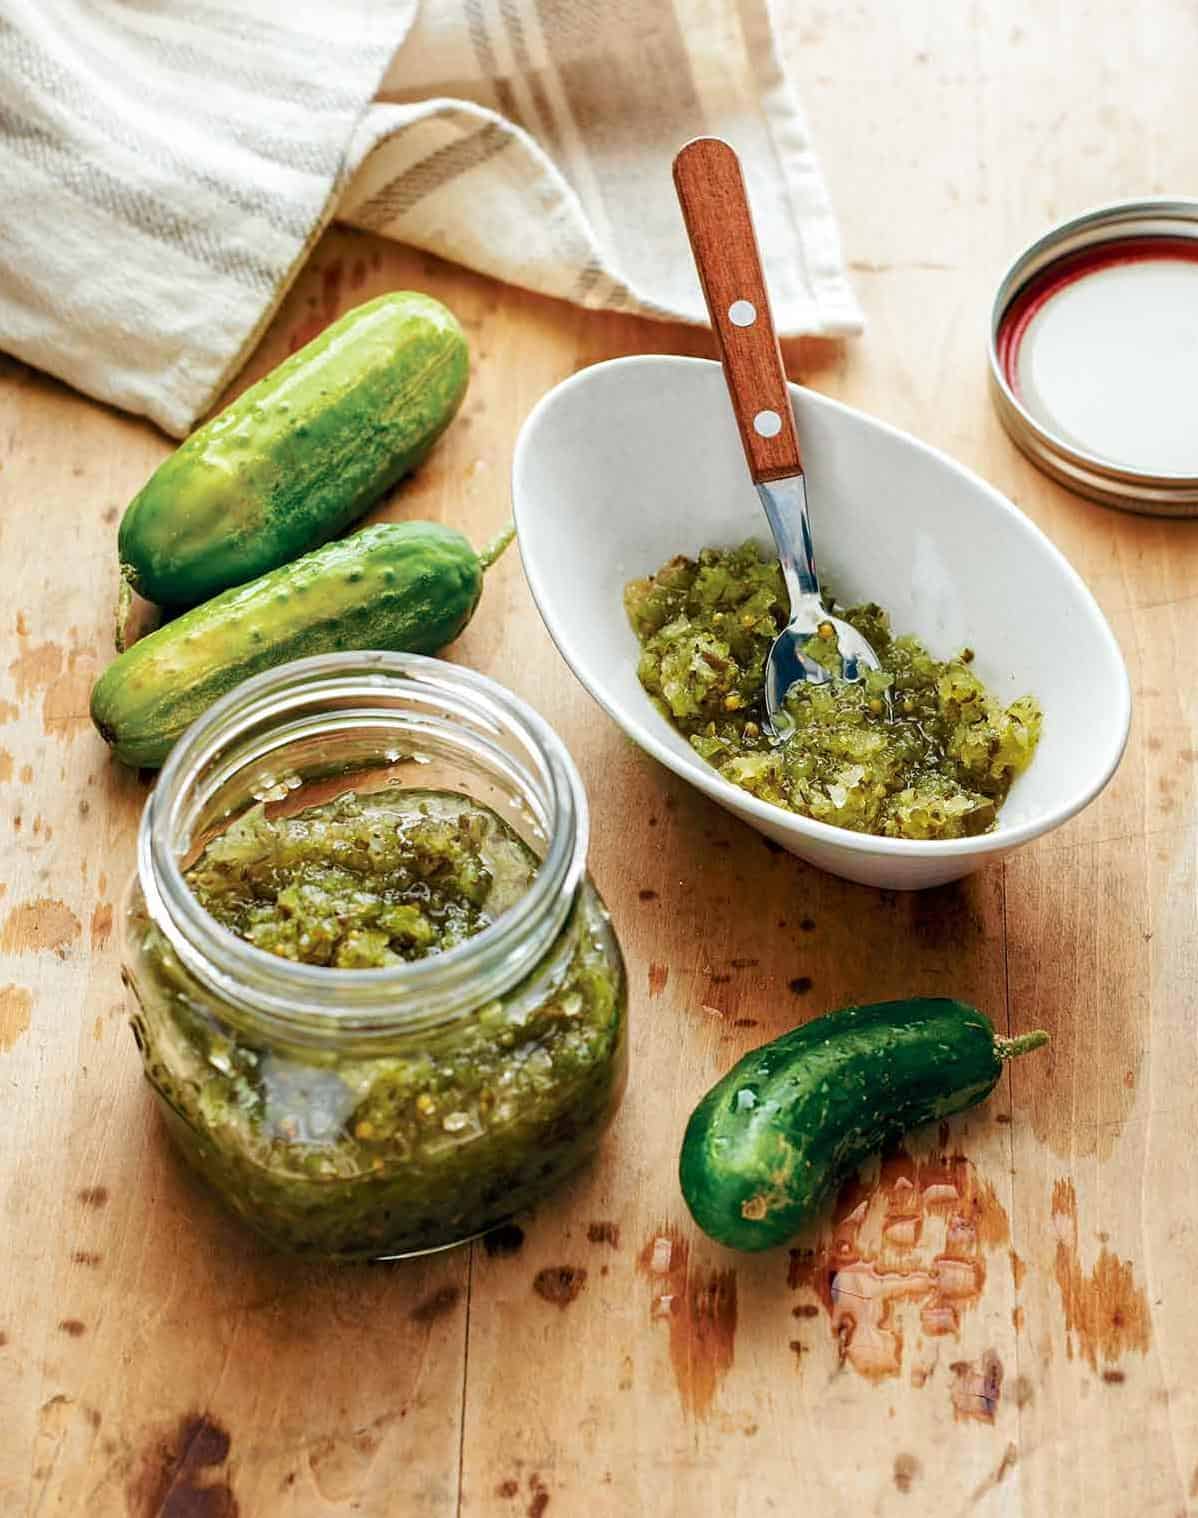  A relish so good, you'll want to put it on everything.